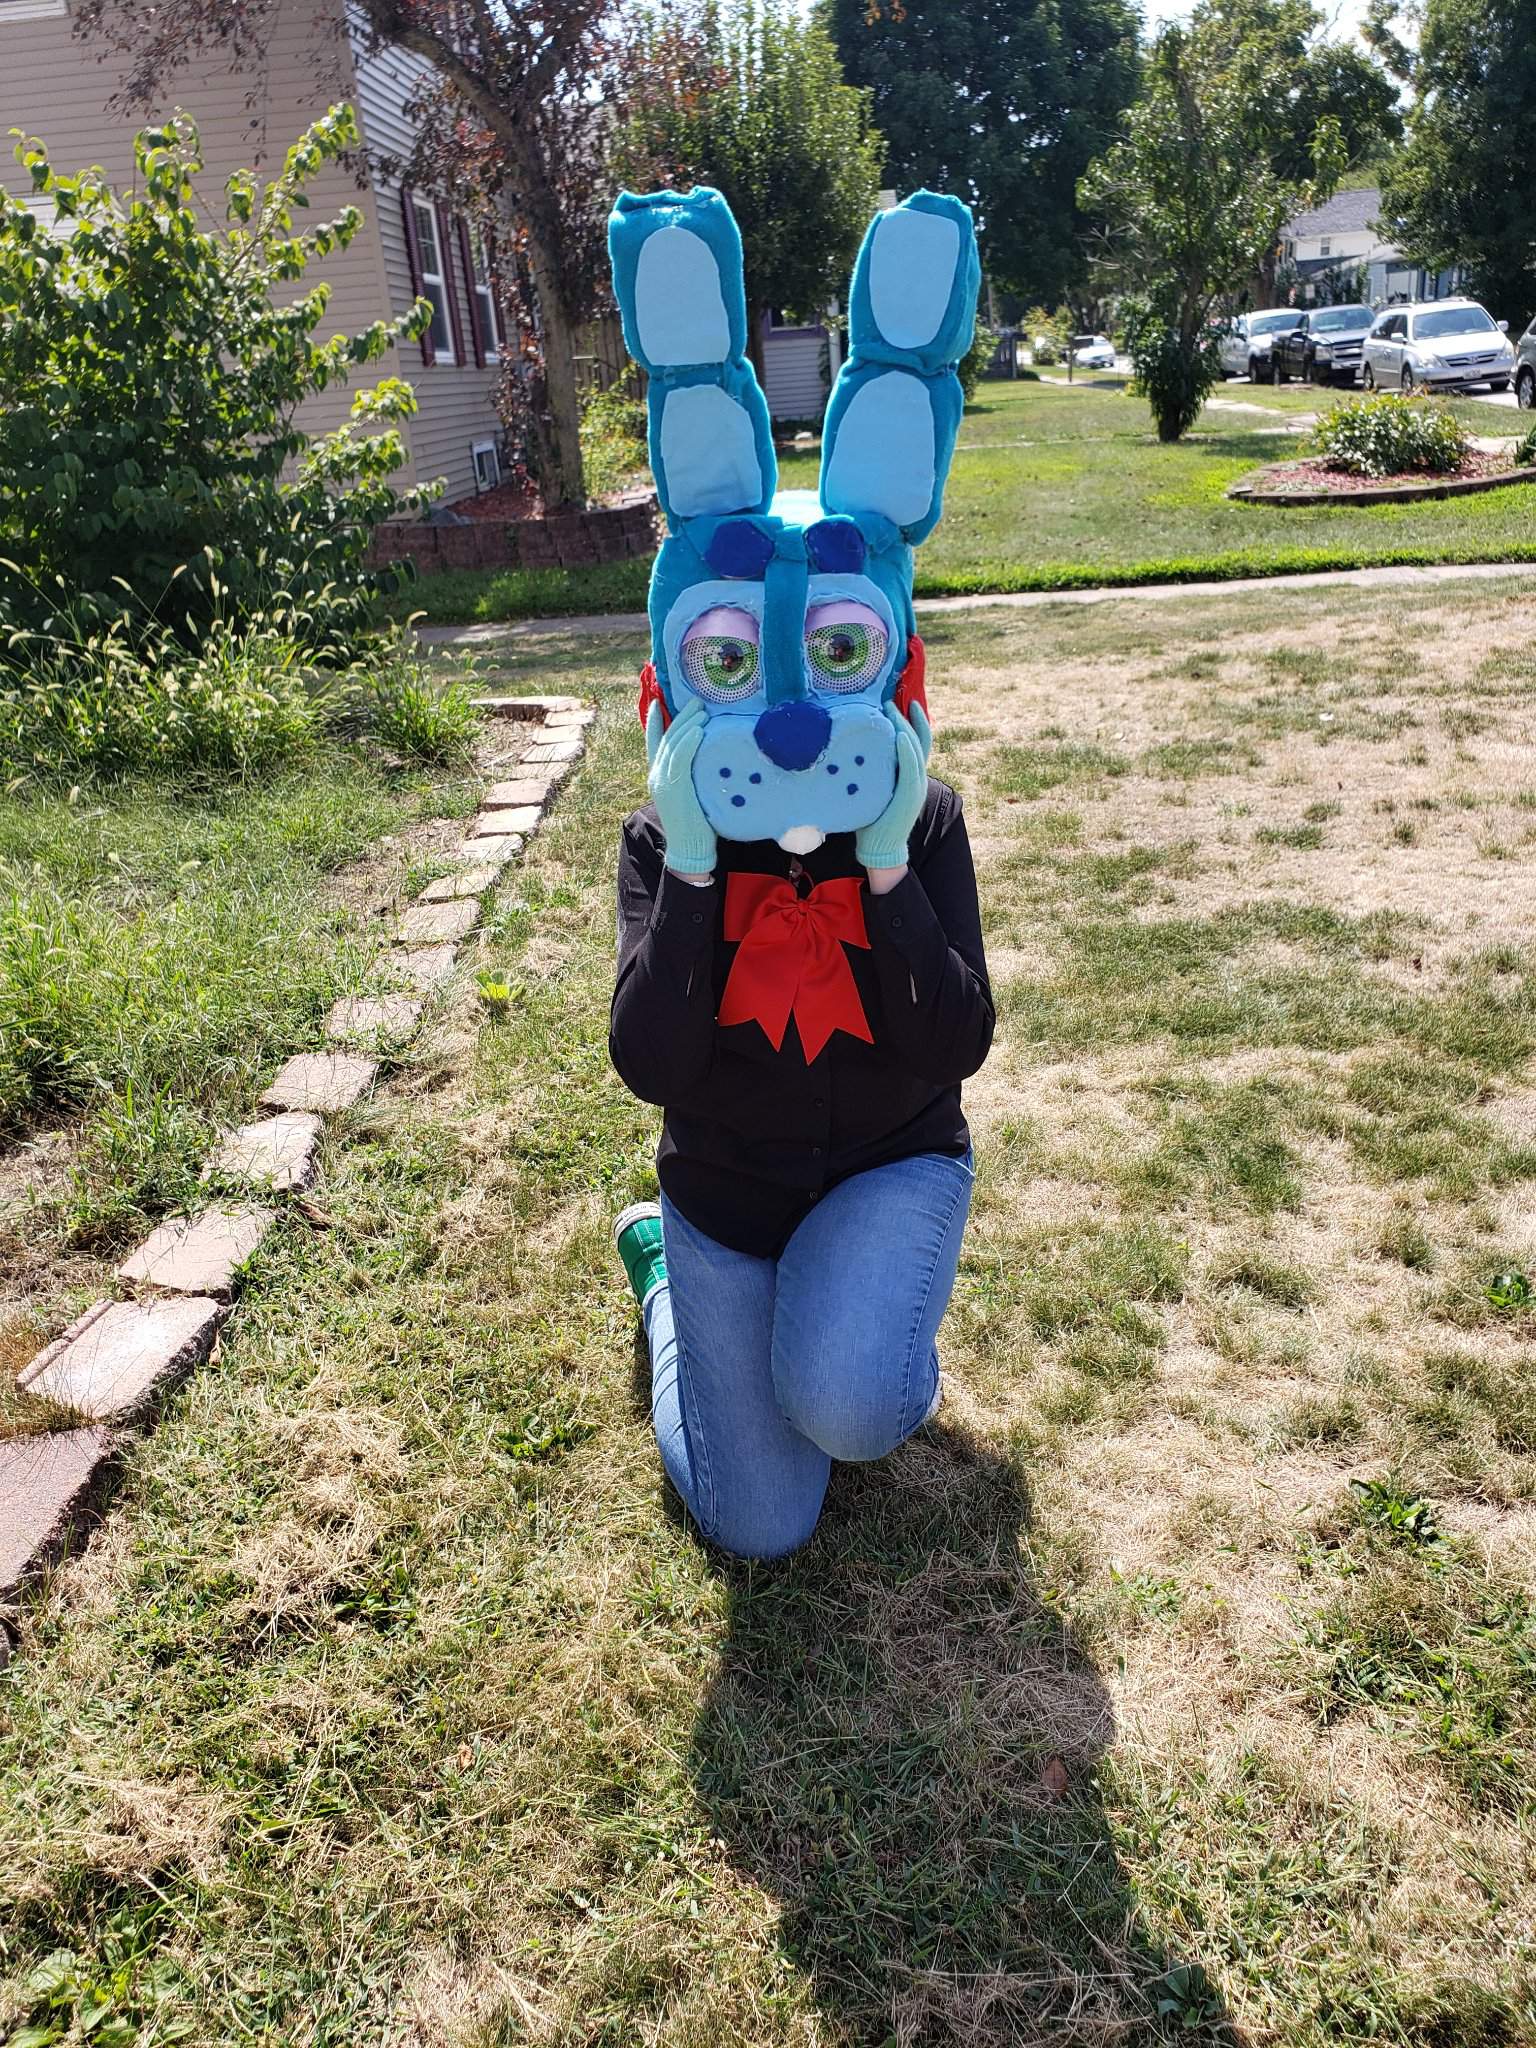 Toy Bonnie Mascot Costume From Five Nights At Freddy S Toy Bonnie ...